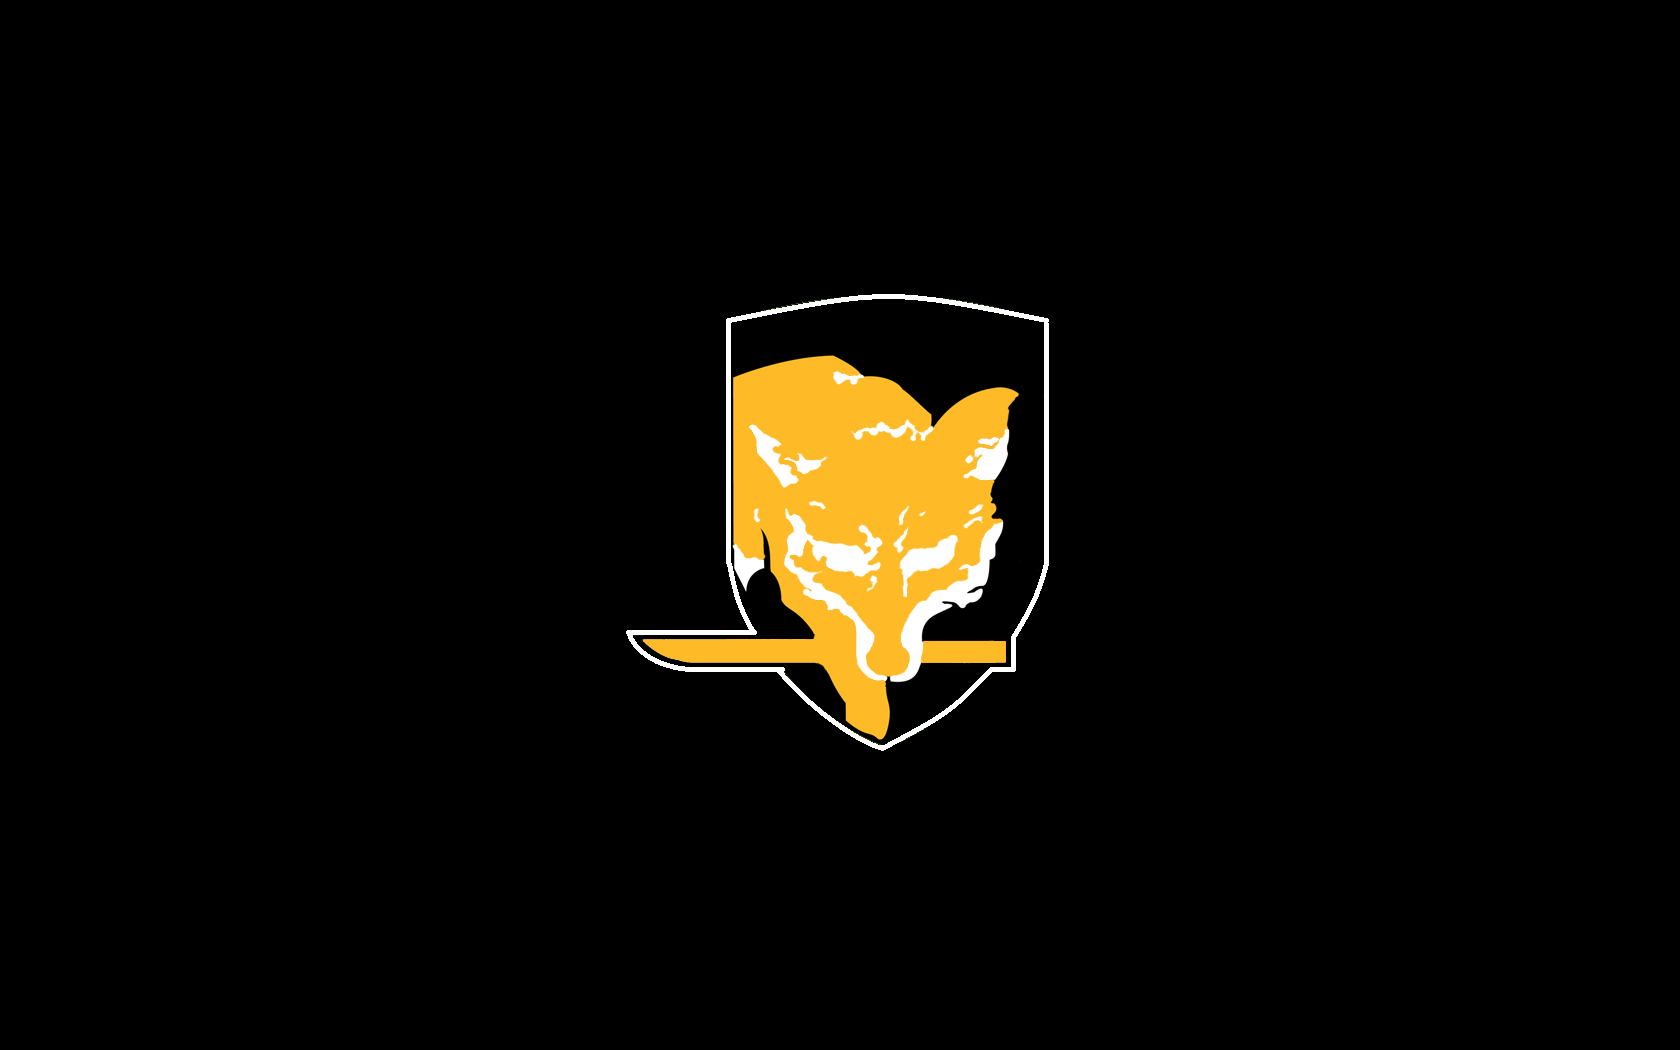 Foxhound Logo Wallpaper just for you guys